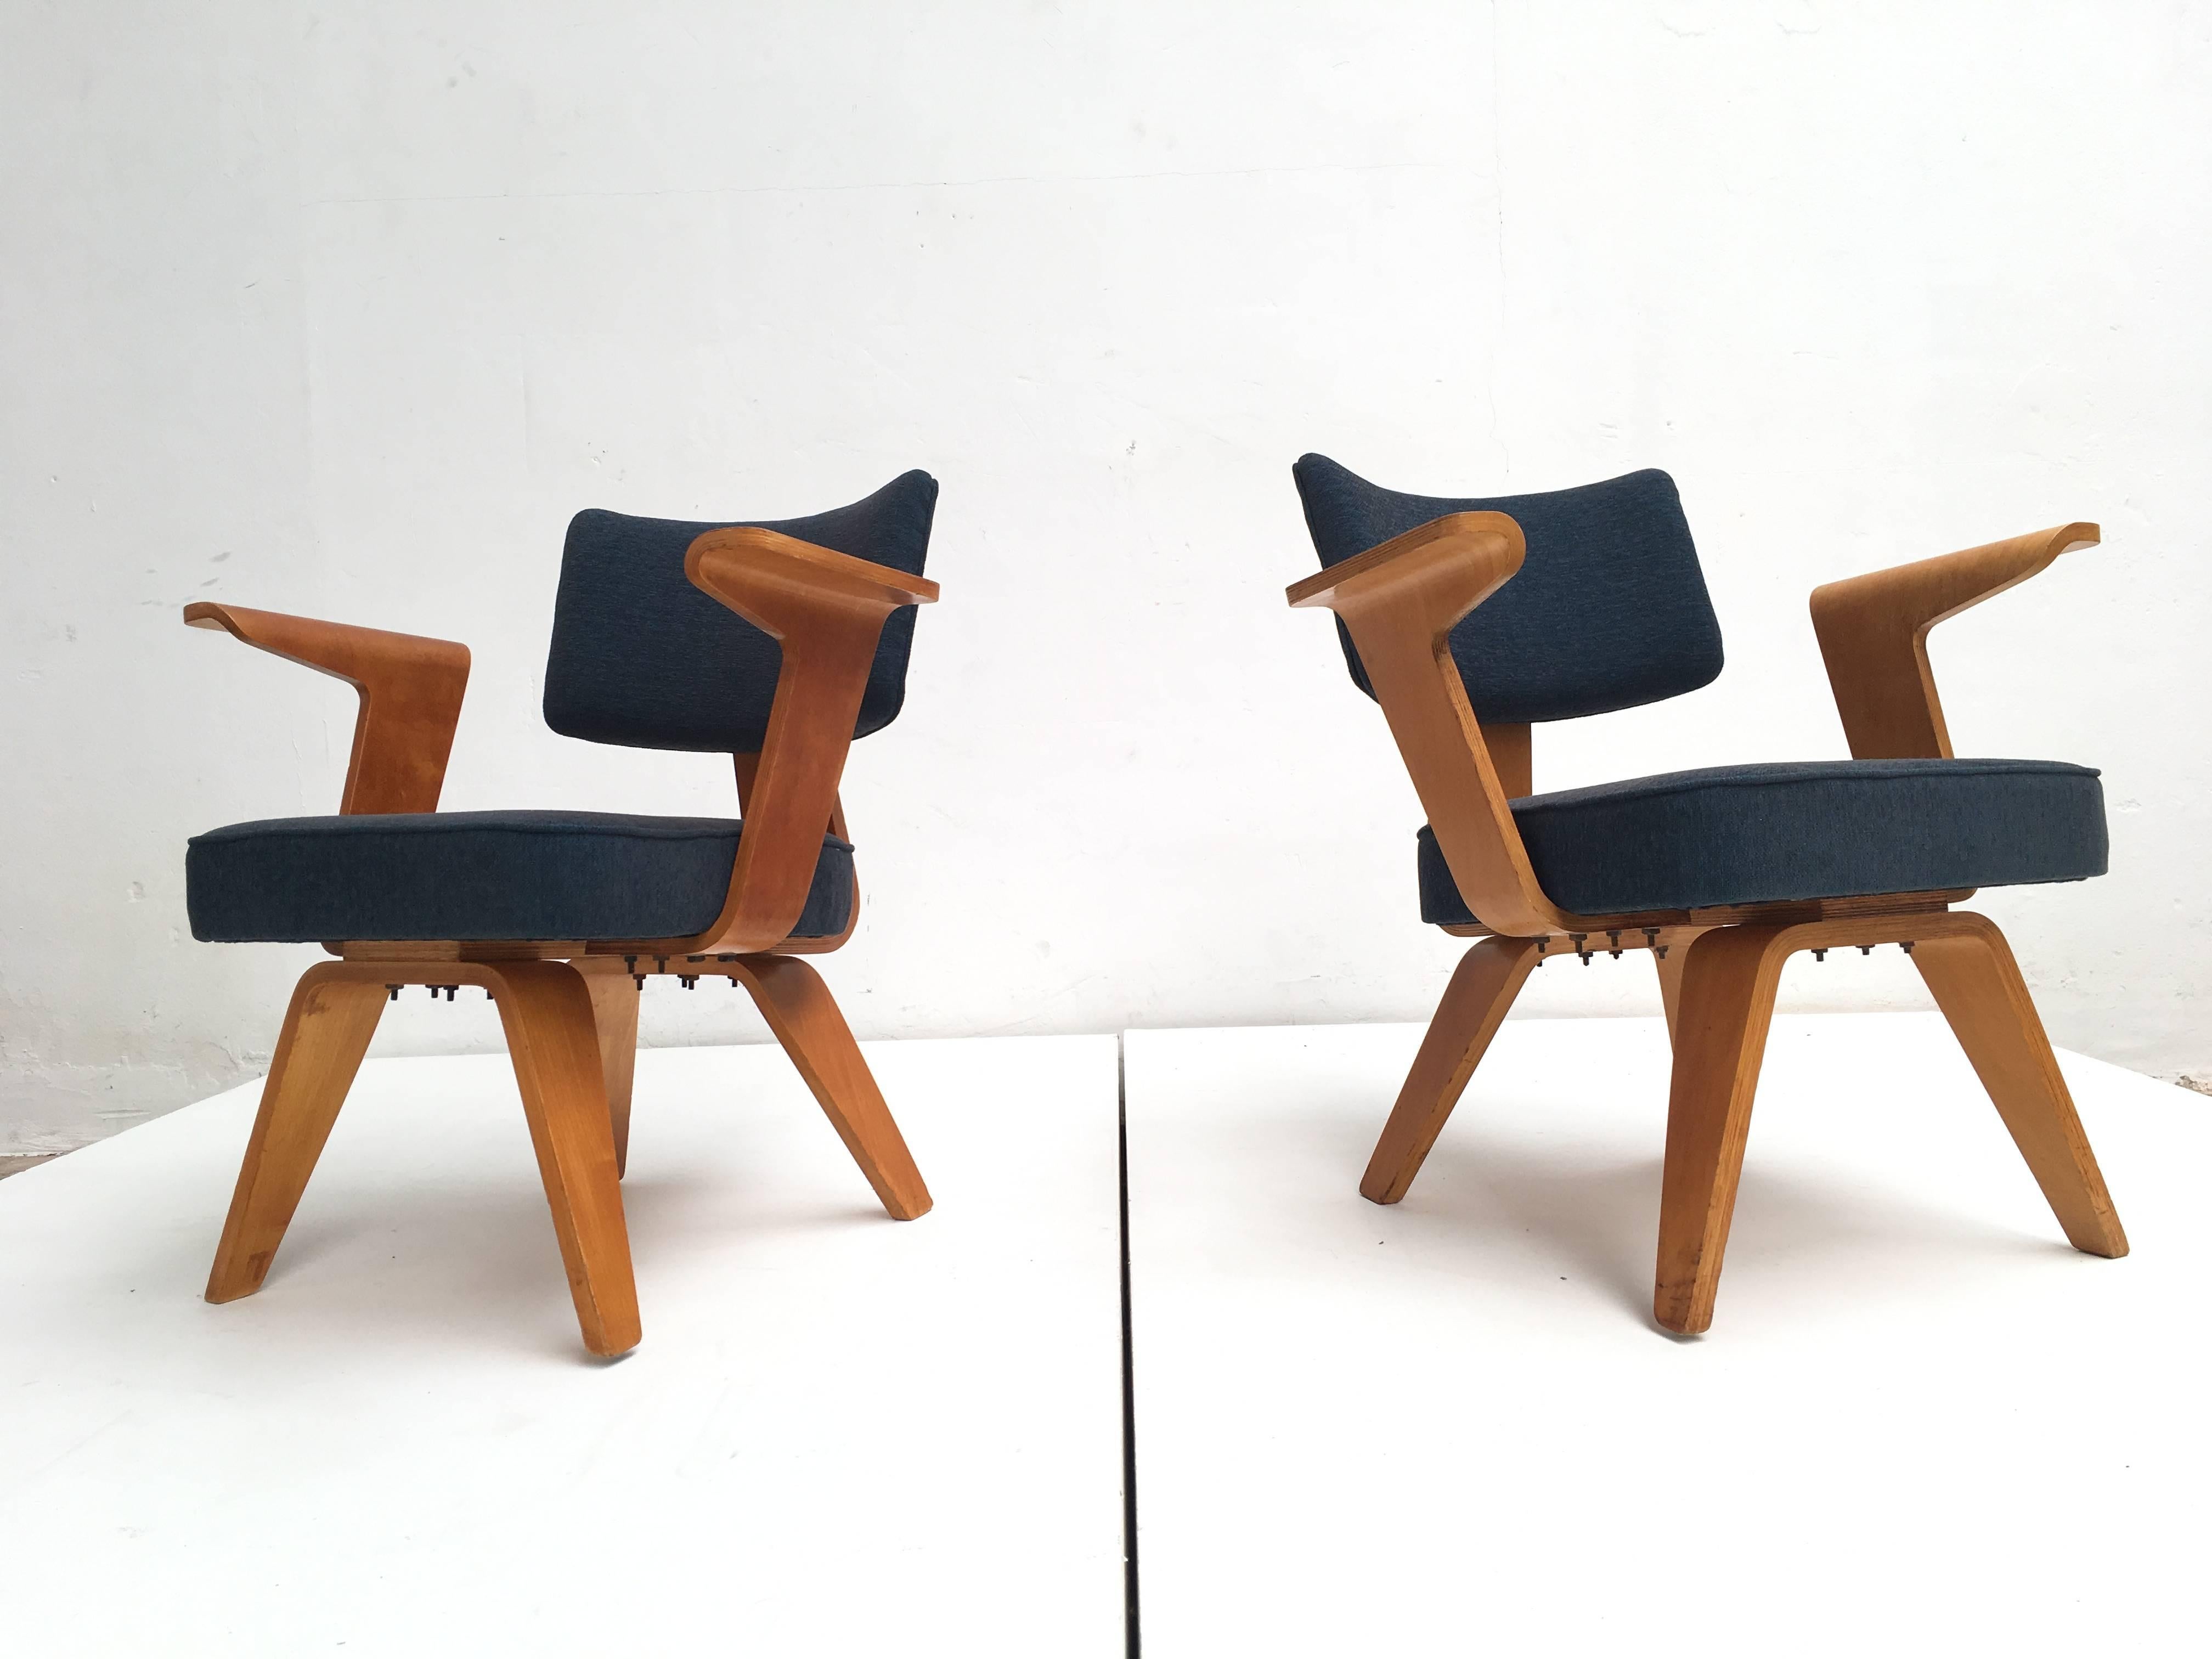 Lovely pair of rare early Dutch Modernism moulded plywood easy chairs with armrests

Cor Alons was the first Dutch interior and Industrial designer that started to work with moulded plywood just after WWII 1945-1950 in The Netherlands

His